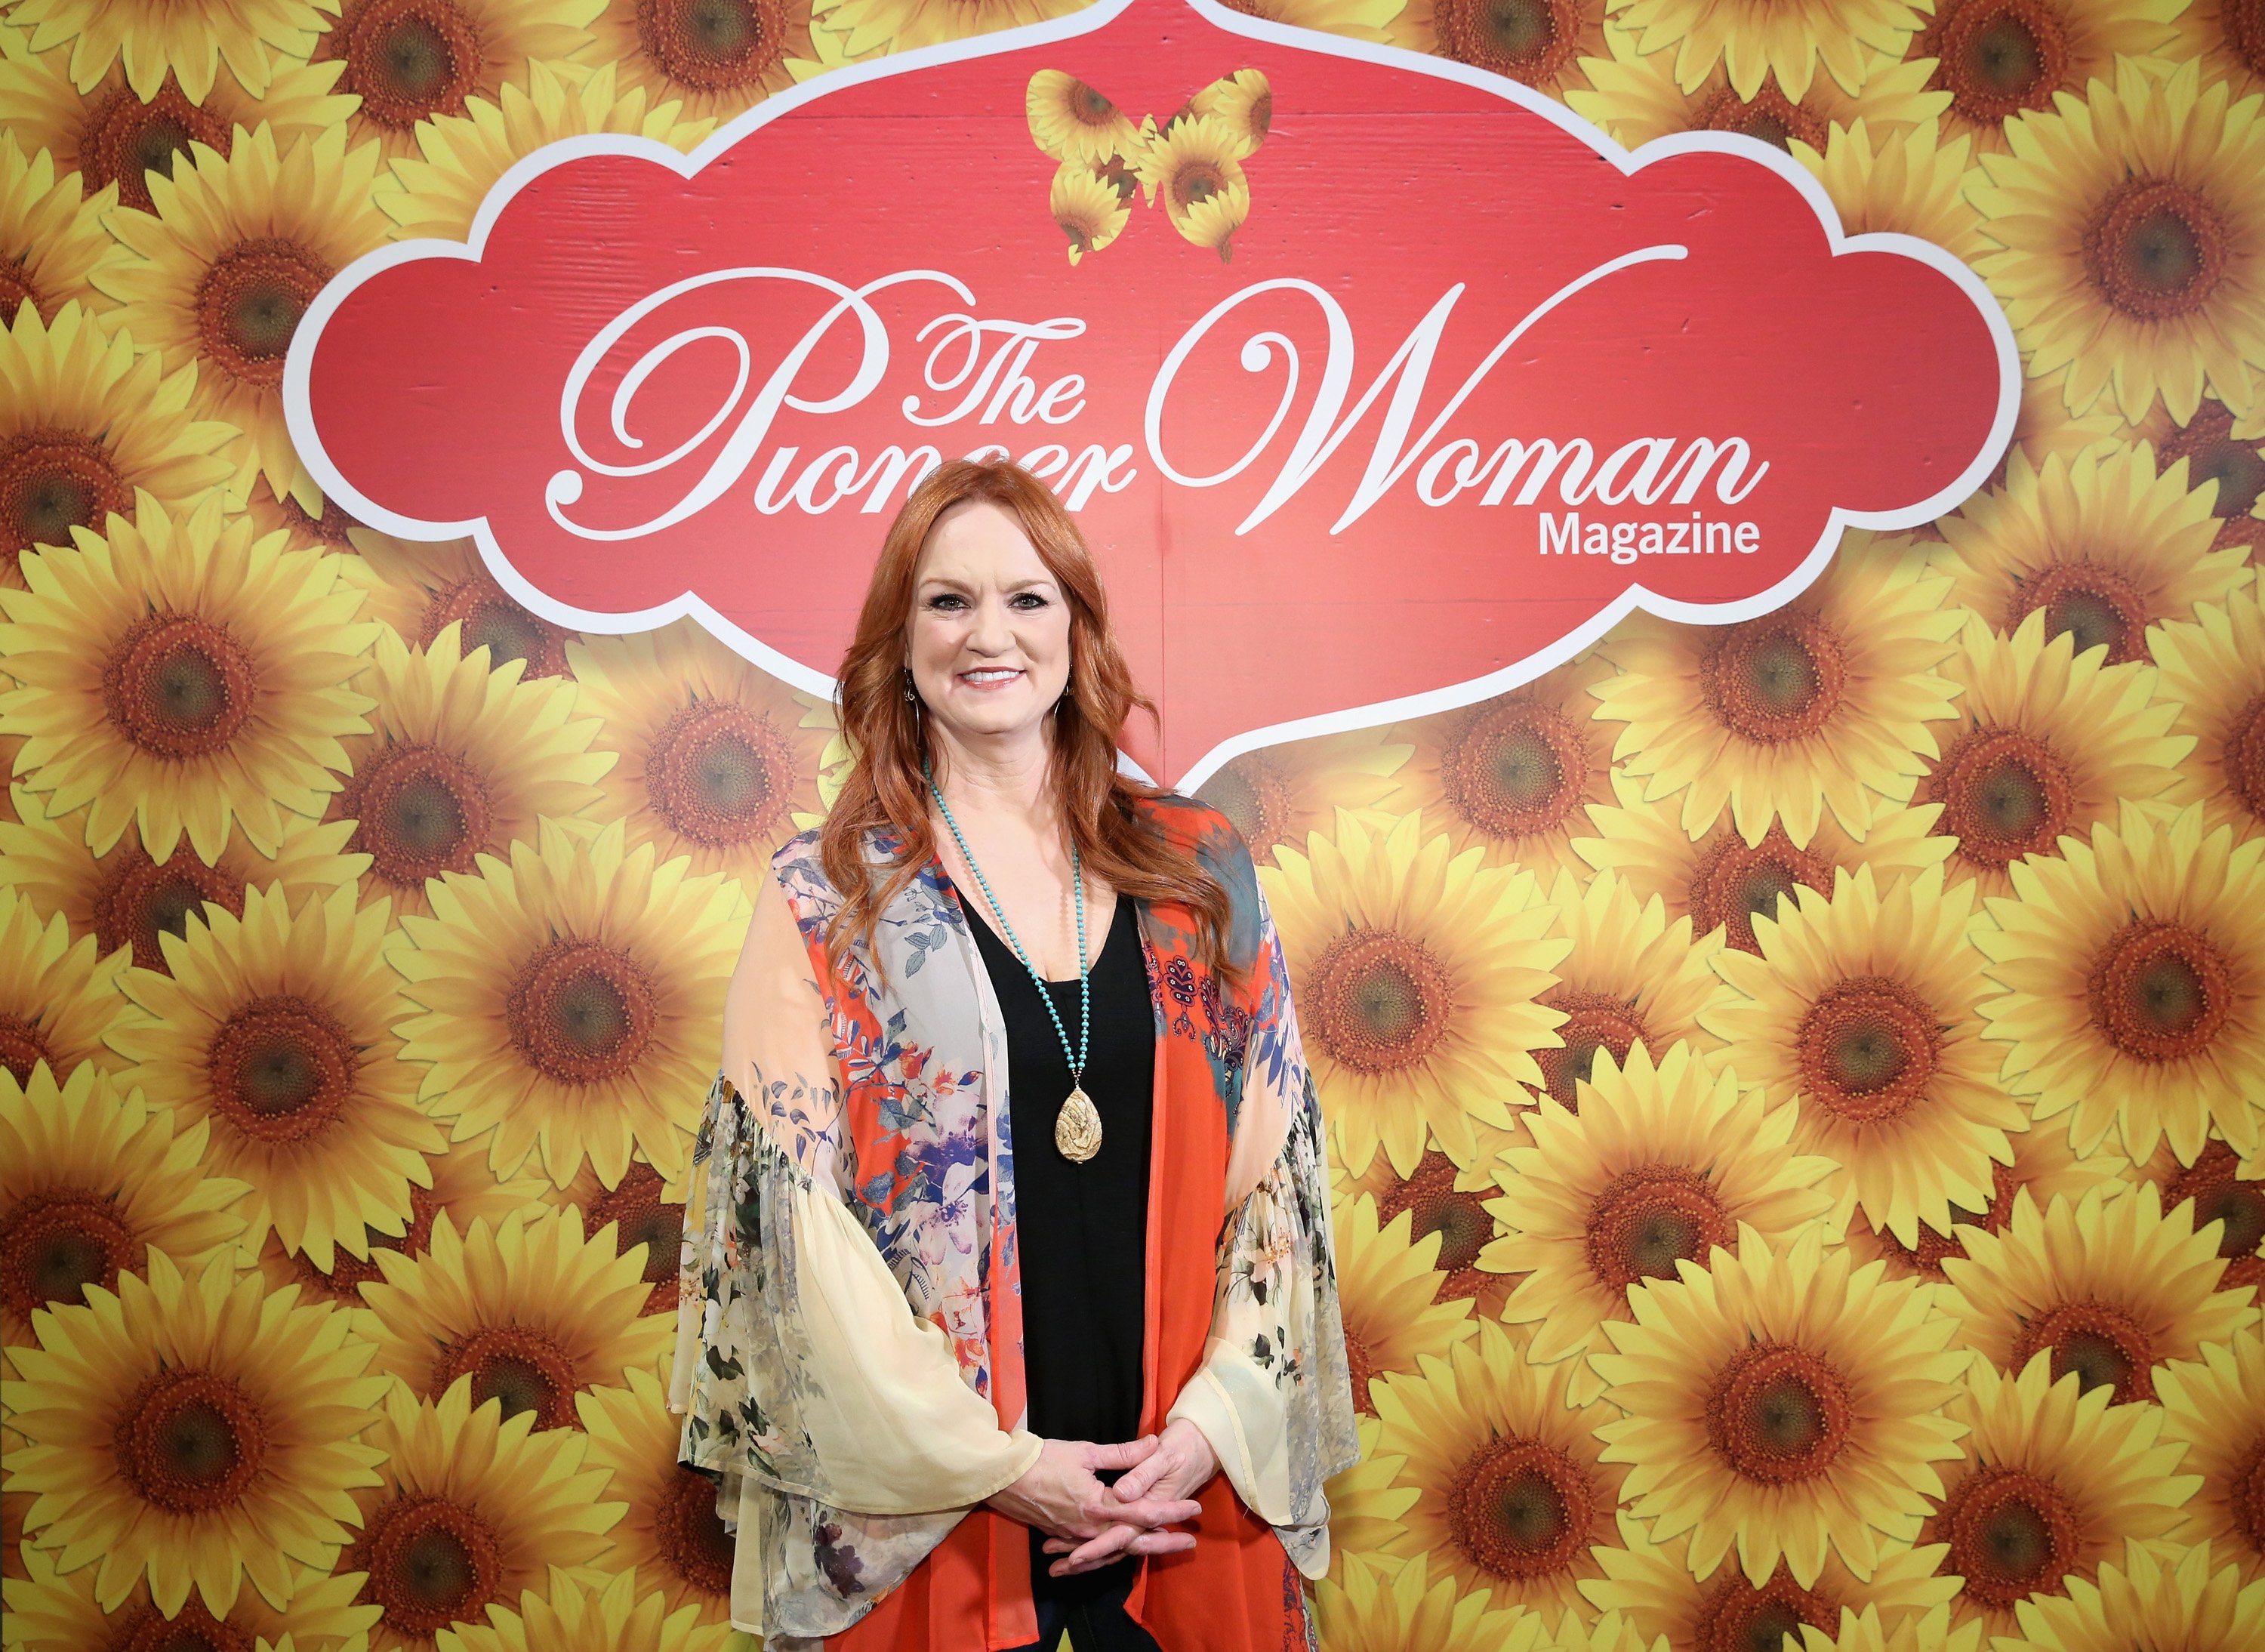 Ree Drummond poses in front of a flower wall at The Pioneer Woman magazine event.